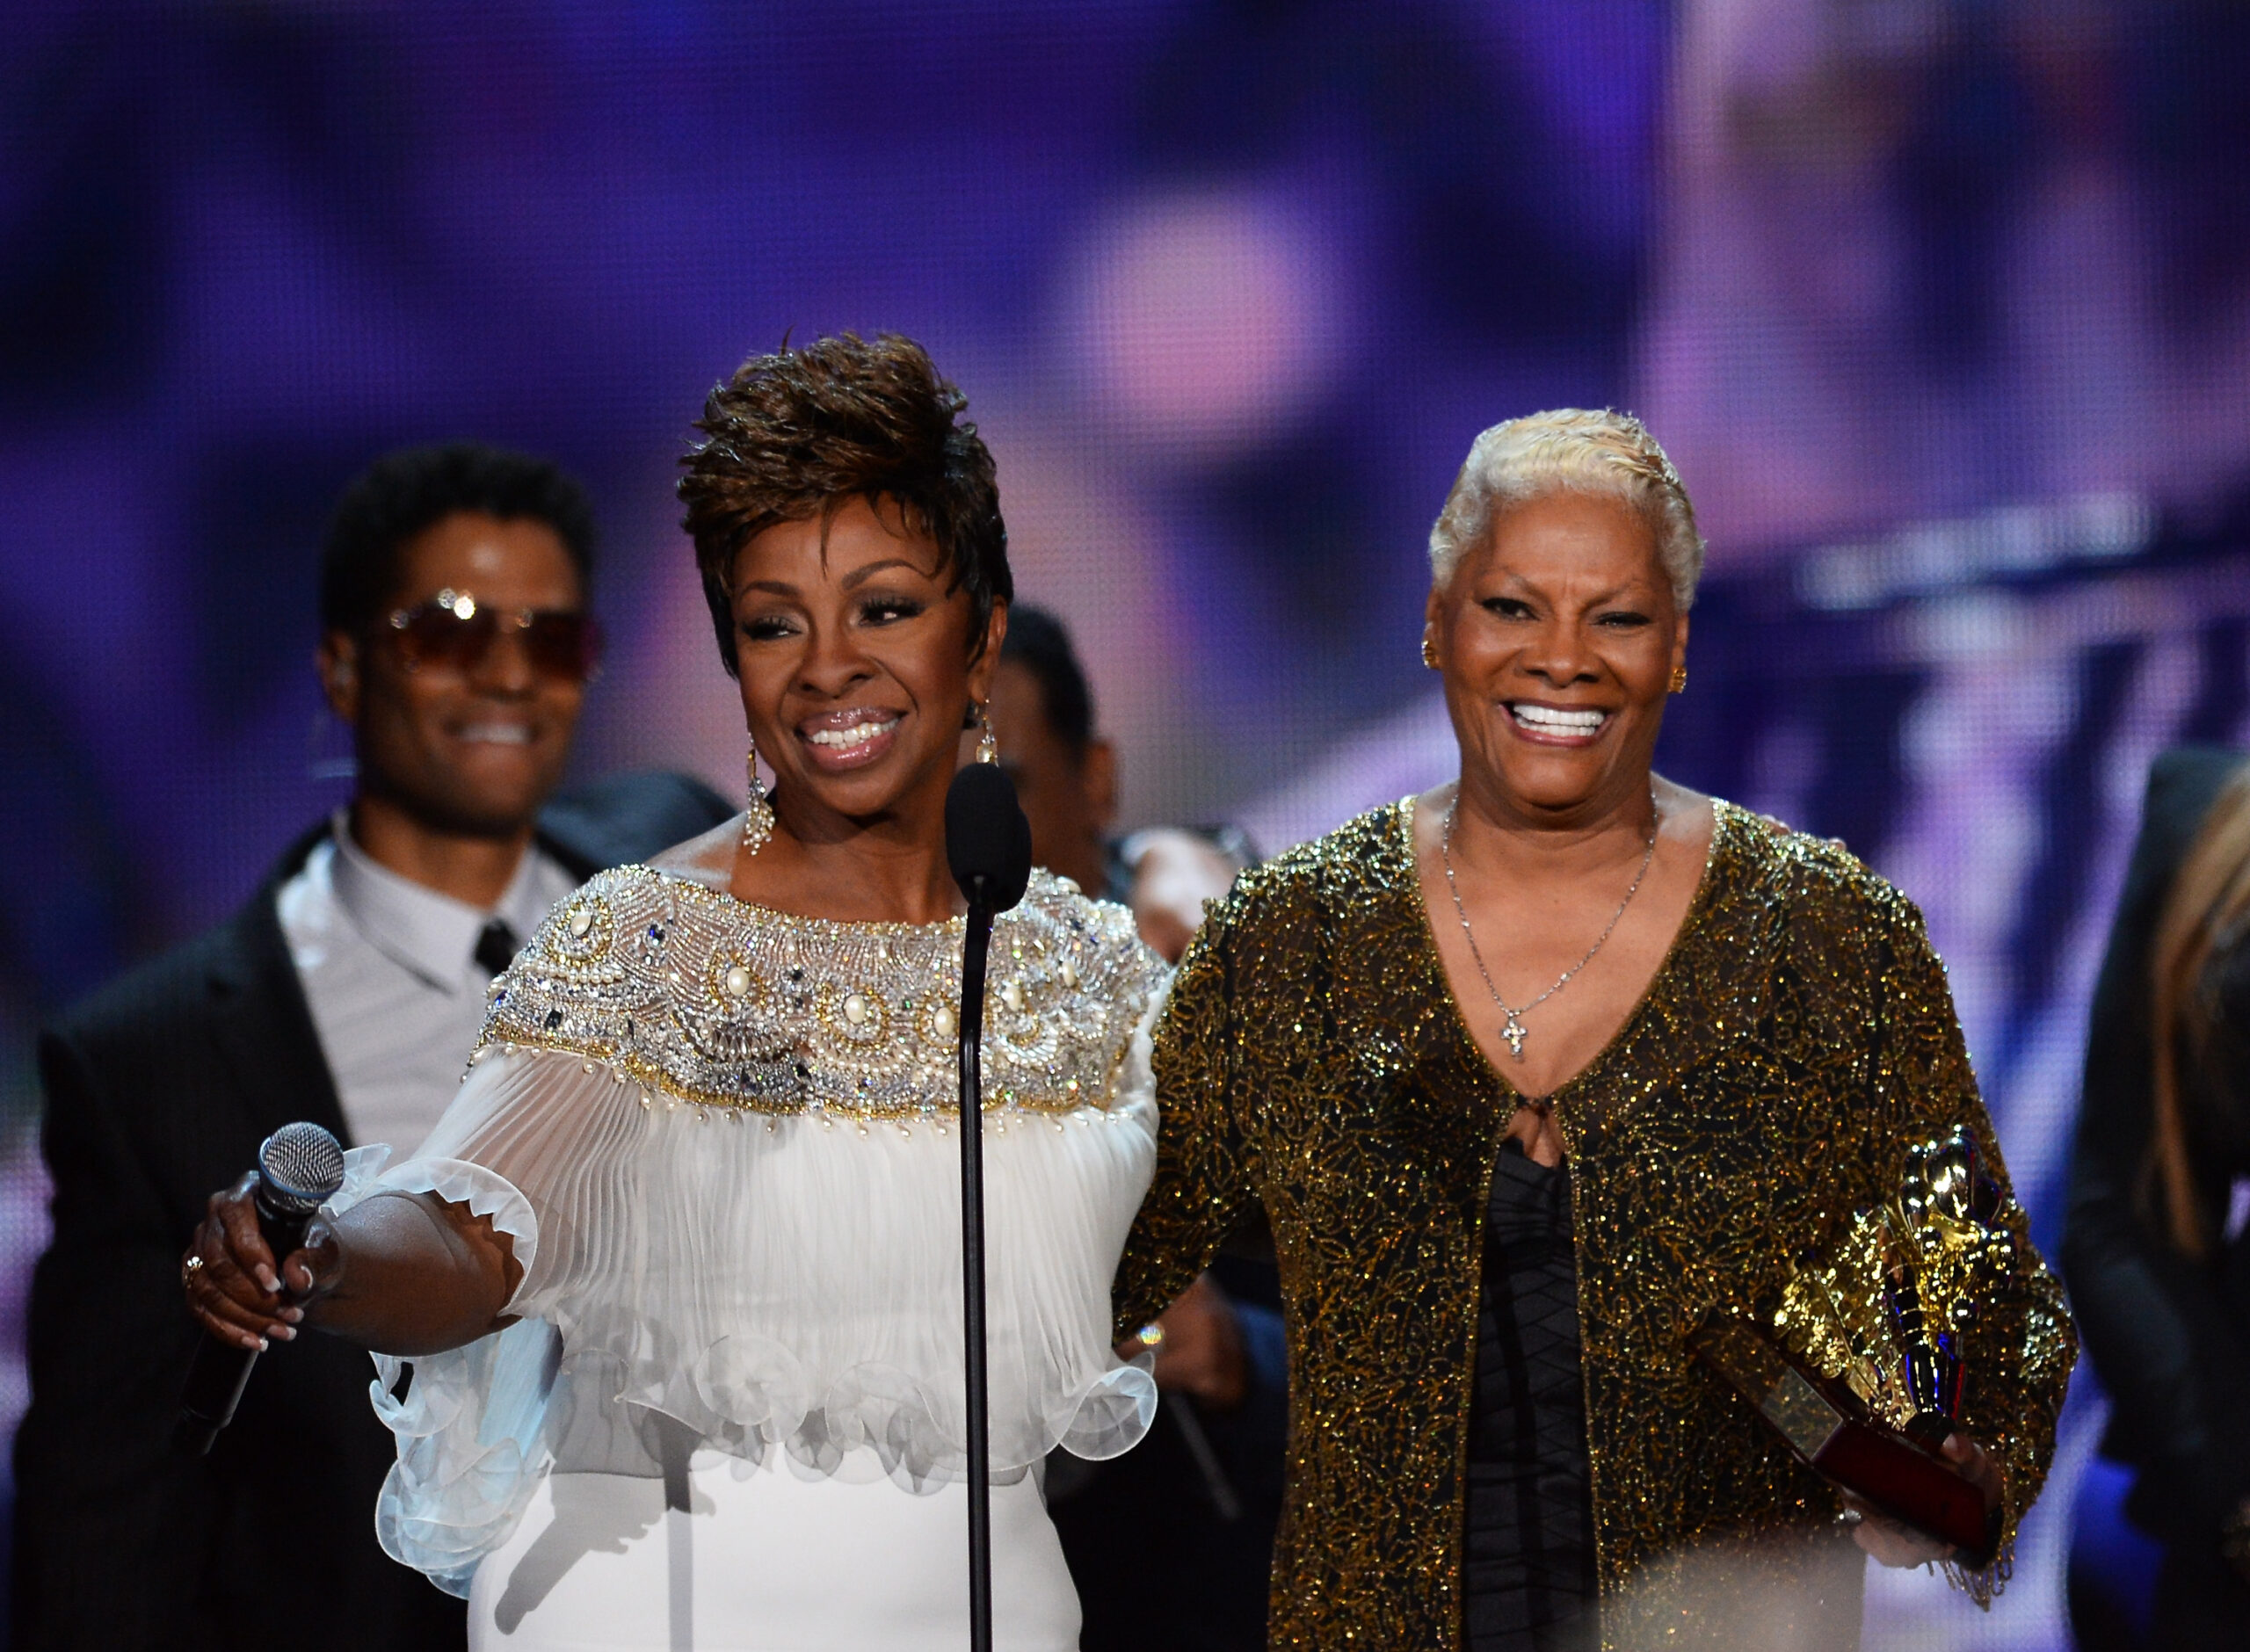 Fans Are Cracking Up Over Dionne Warwick’s Response to Being Misidentified as Gladys Knight